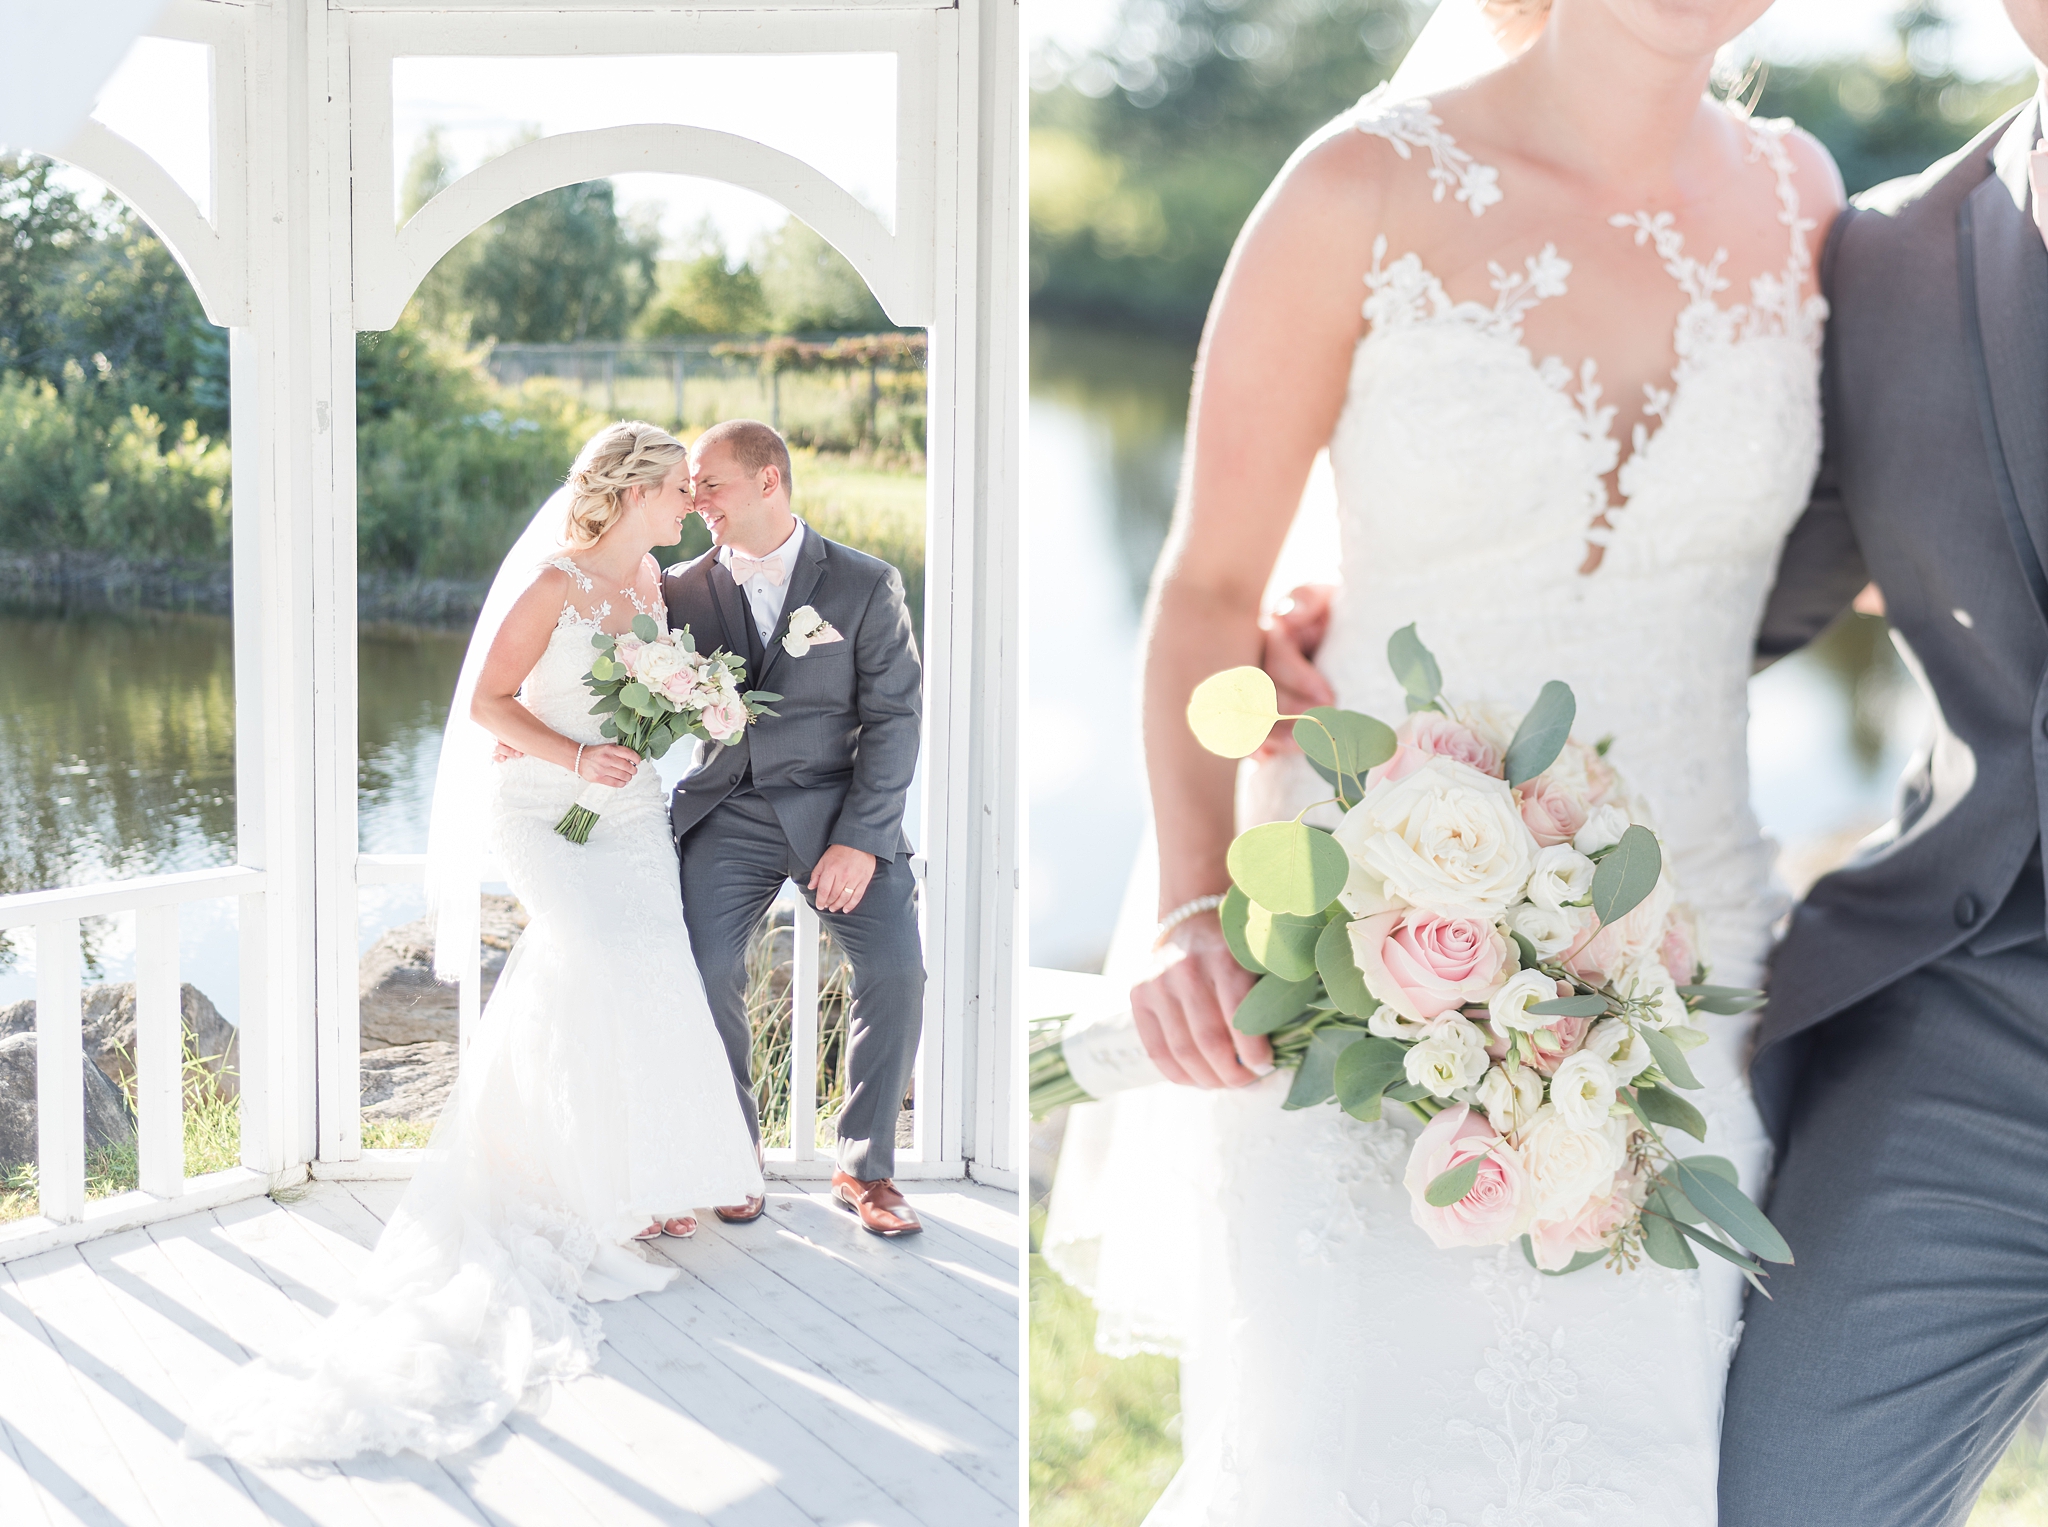 legant Blush & Gold Timeless Wedding at Orchardview Wedding and Conference Centre | Ottawa Wedding Get more inspiration from this fun summertime wedding. #ottawawedding #weddingphotography #ottawaweddings